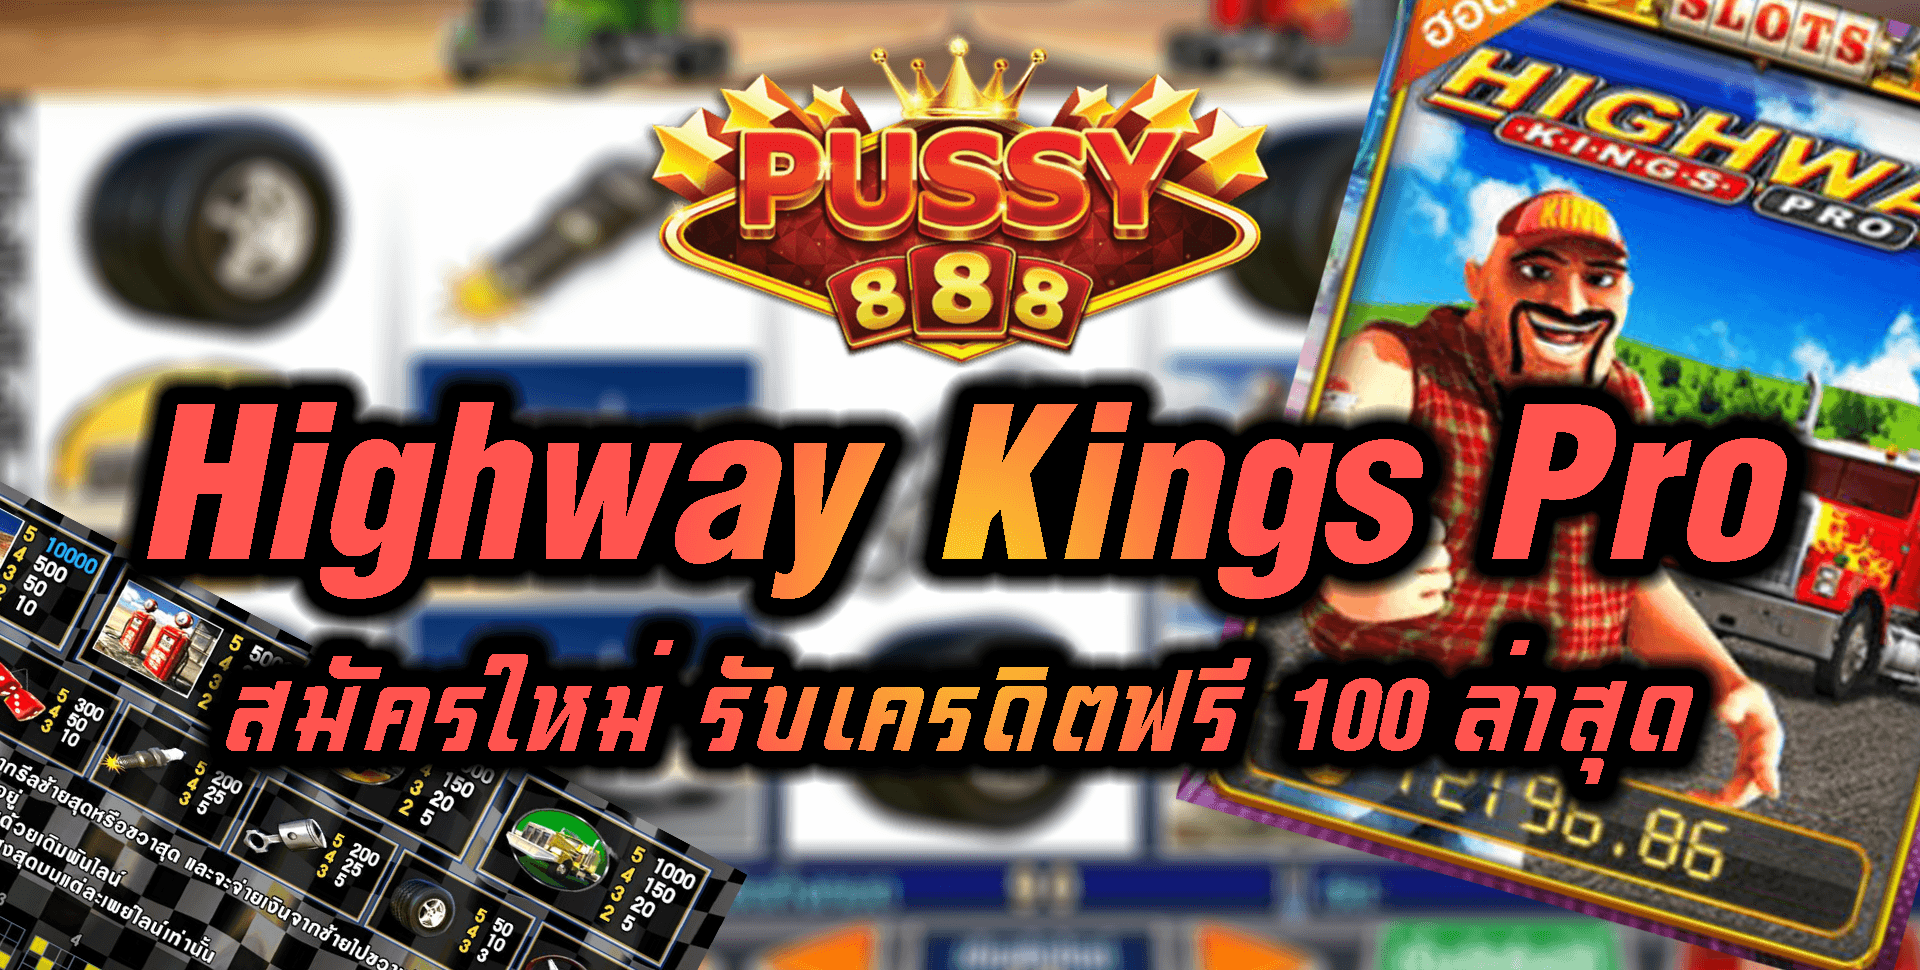 Pussy888-Highway Kings Pro-5